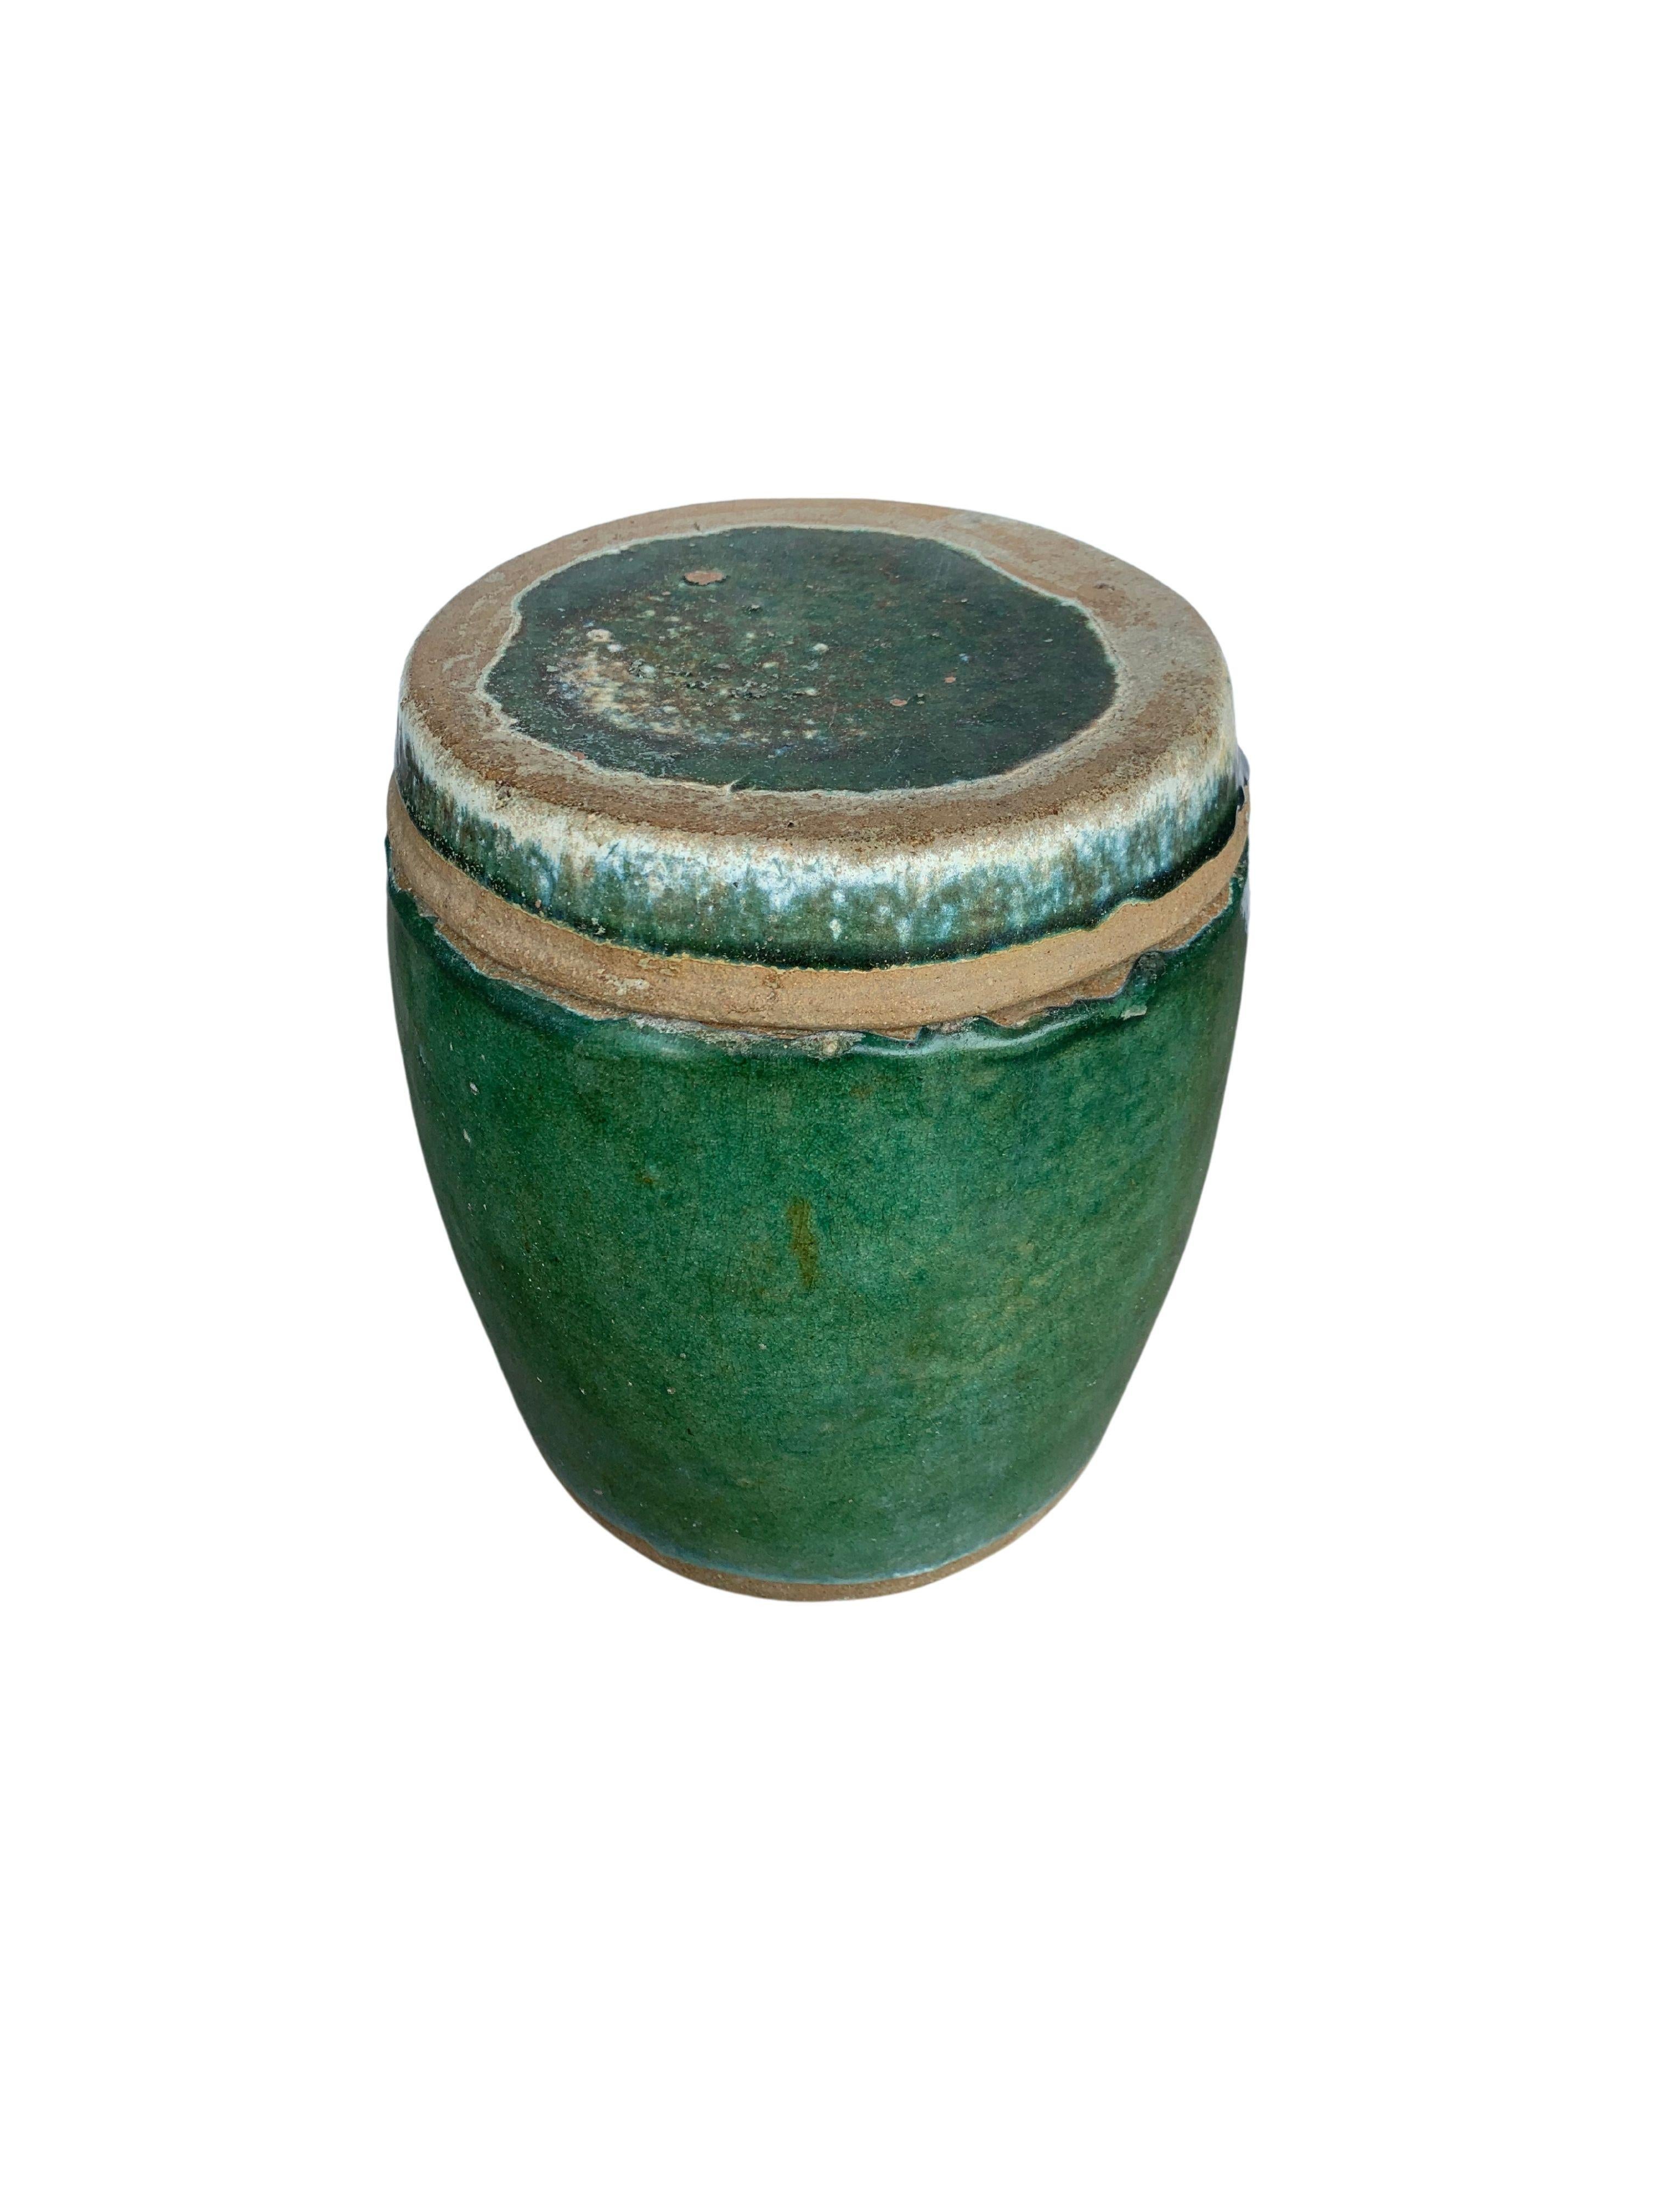 Qing Chinese Shiwan Green Glazed Ceramic Jar / Planter, c. 1900 For Sale